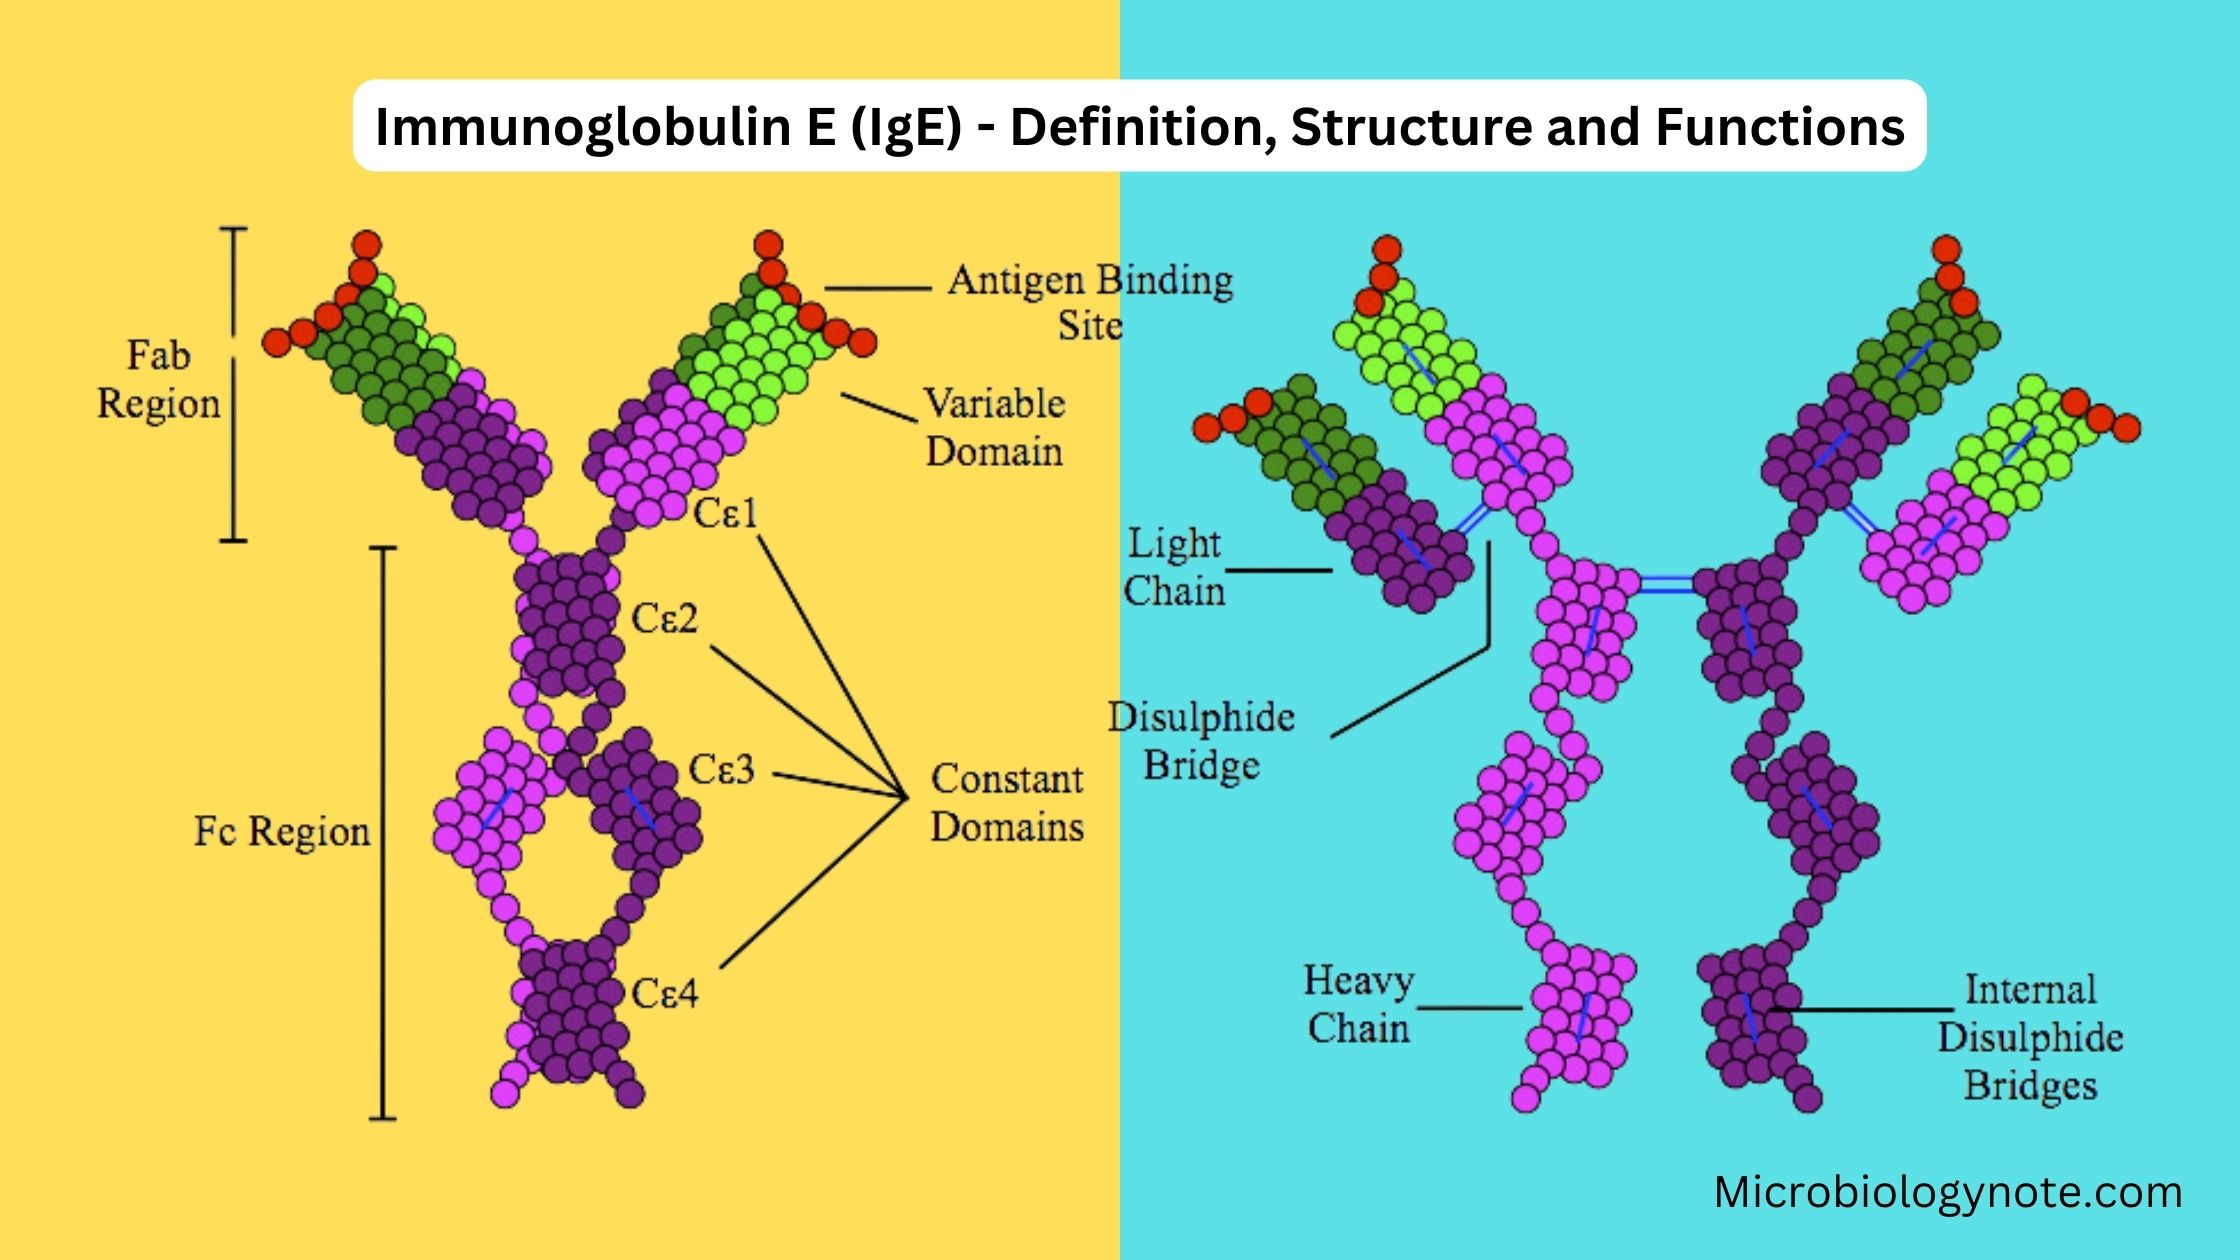 Immunoglobulin E (IgE) - Definition, Structure and Functions